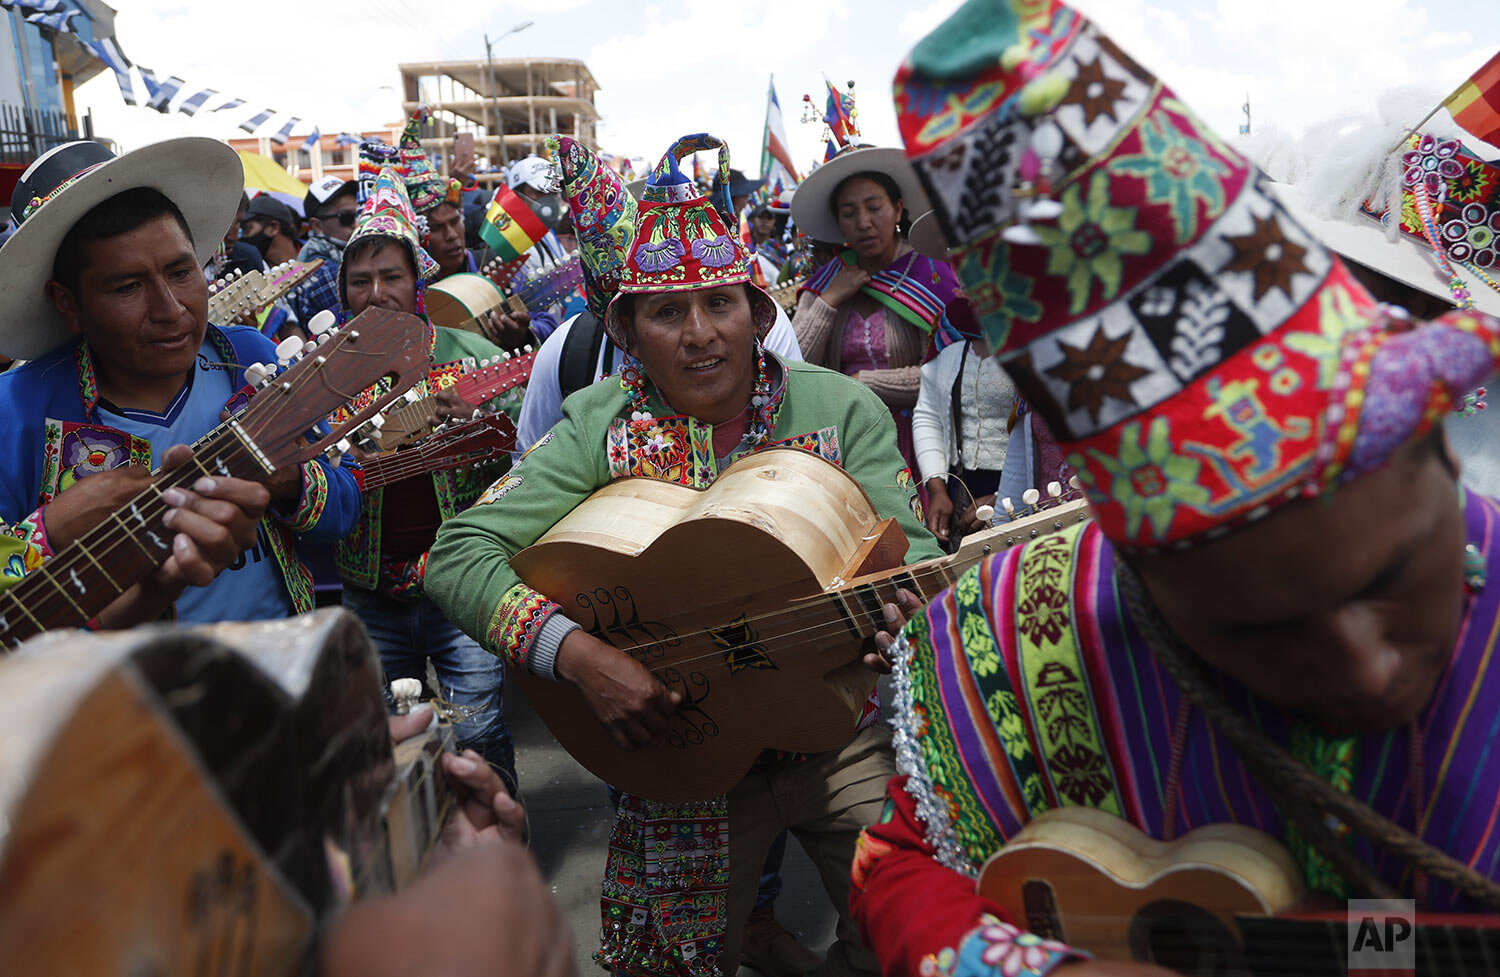  Indigenous Quechua musicians take part in celebration festivities after a final official vote count released yesterday declared Luis Arce the winner of the presidential election, in El Alto, Bolivia, Oct. 24, 2020. (AP Photo/Juan Karita) 